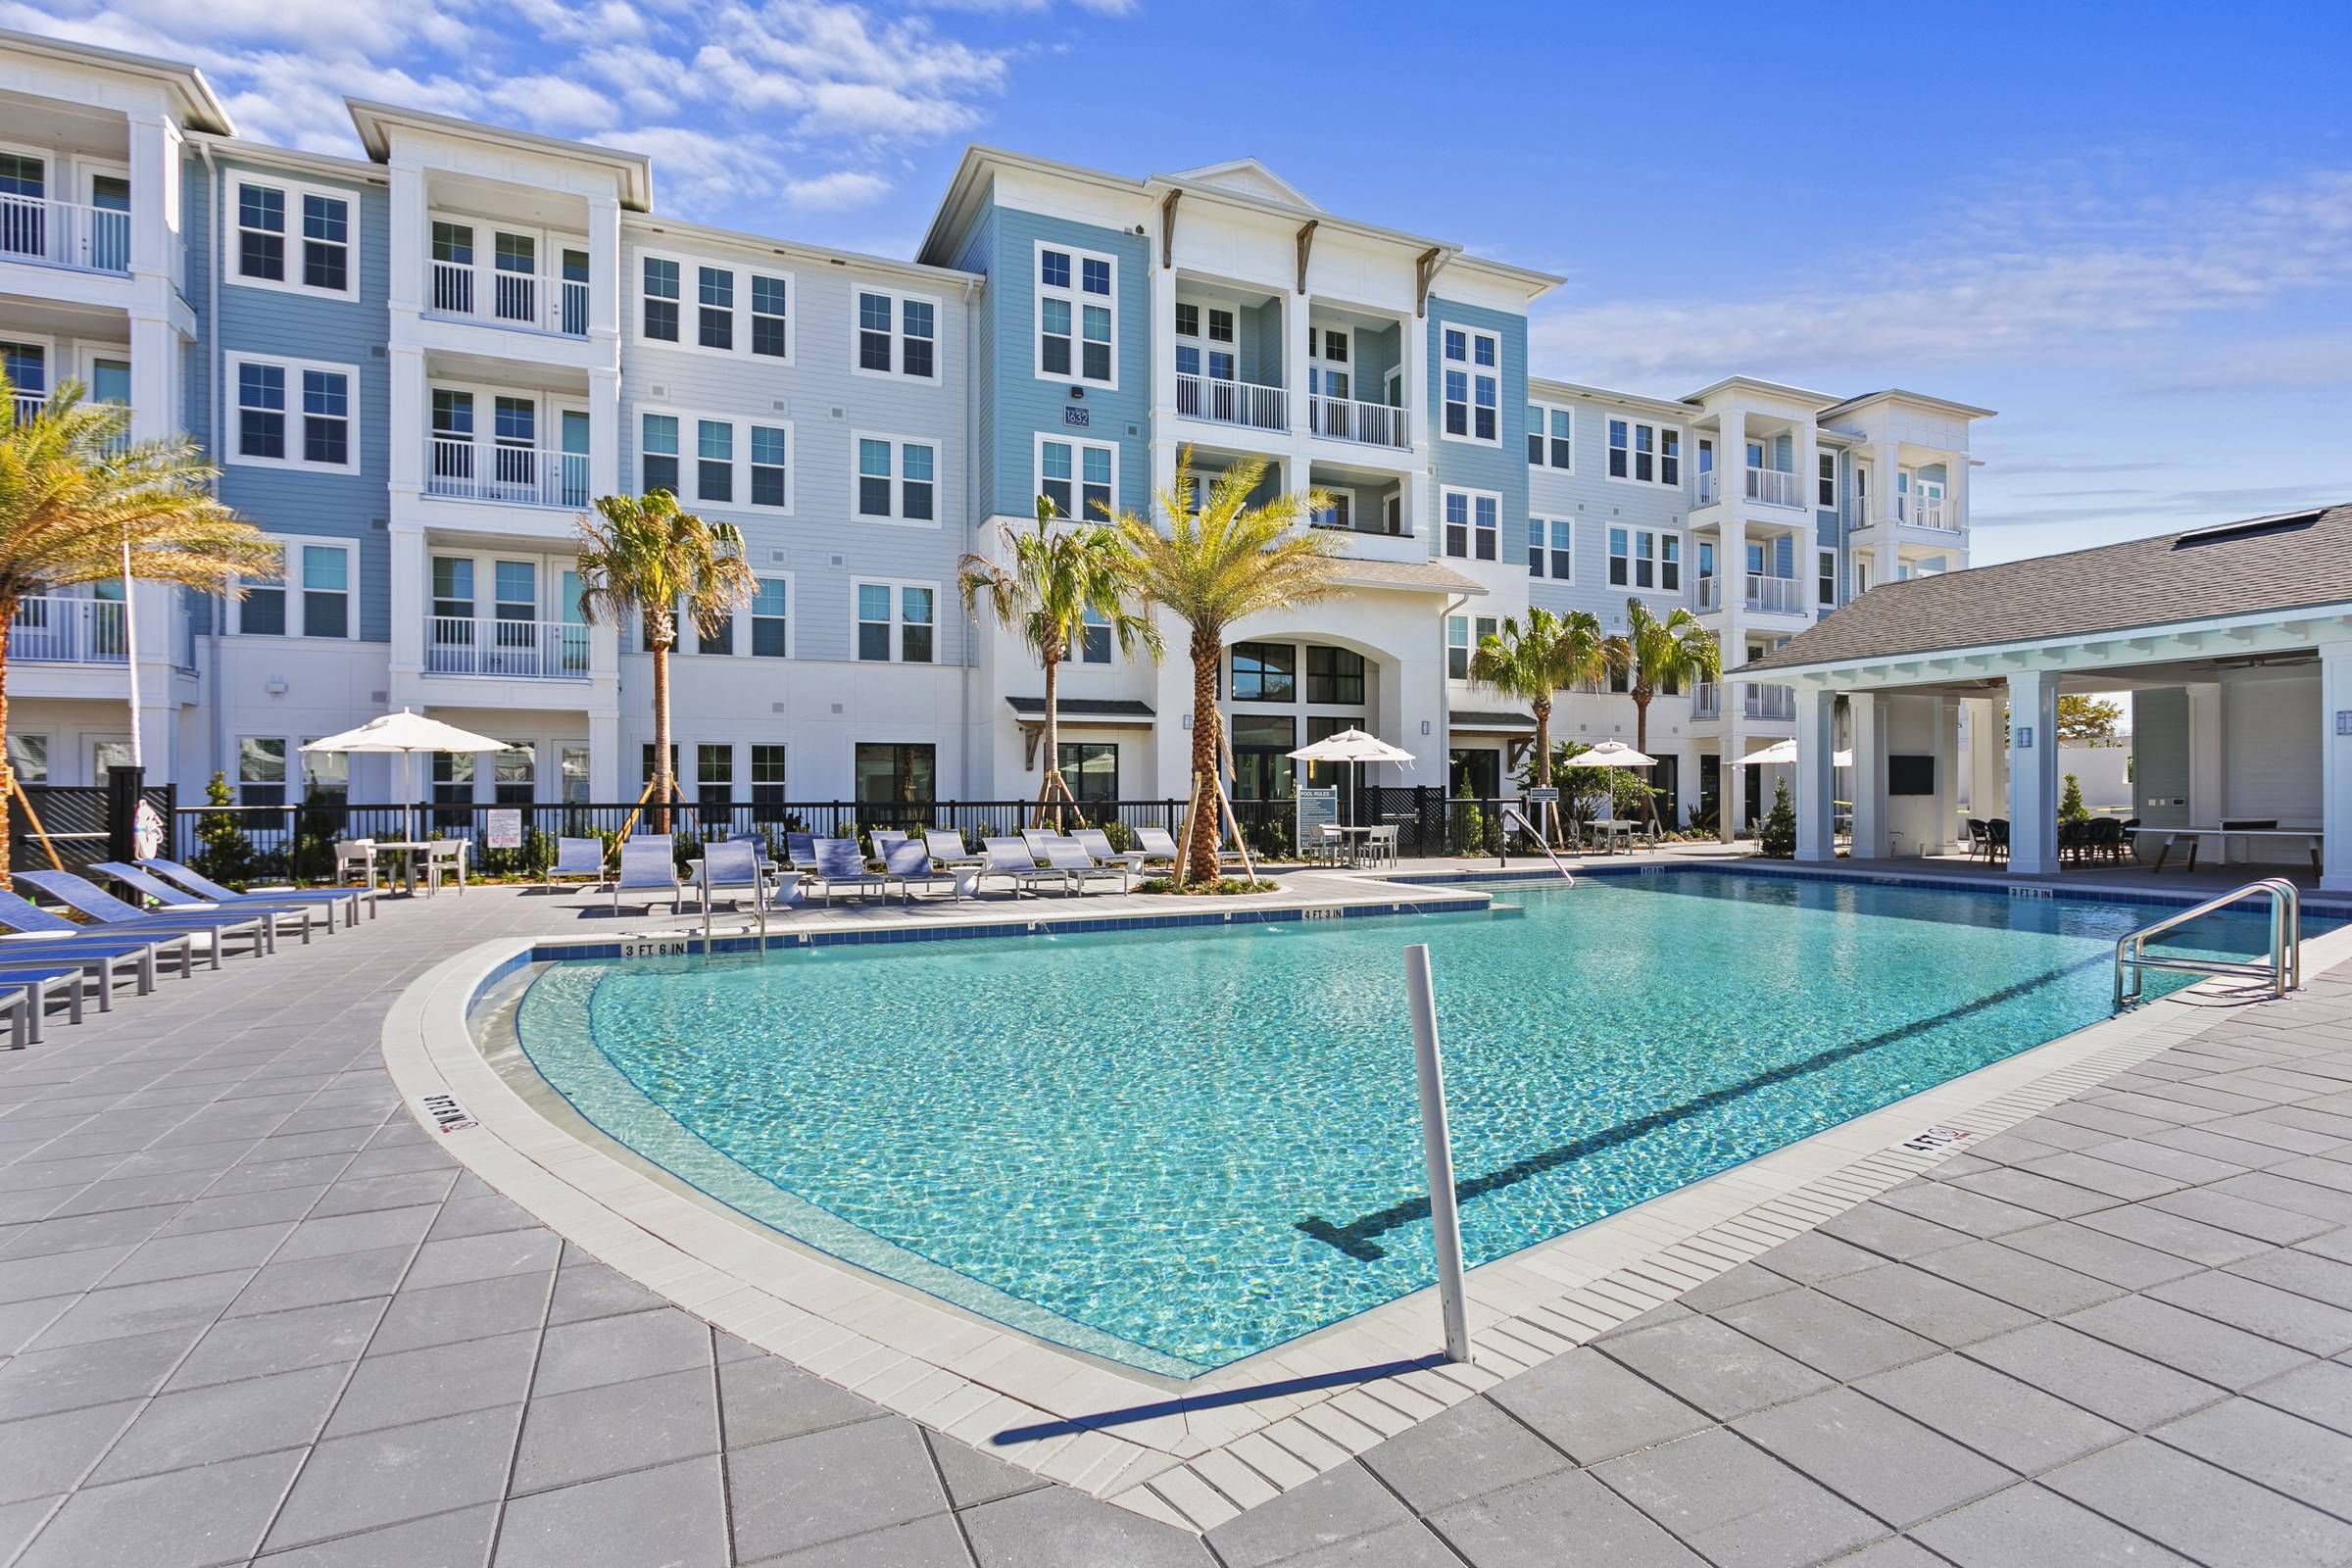 A sparkling blue swimming pool at Alta Belleair flanked by a white multi-story building and a row of sun loungers, set under a clear blue sky.